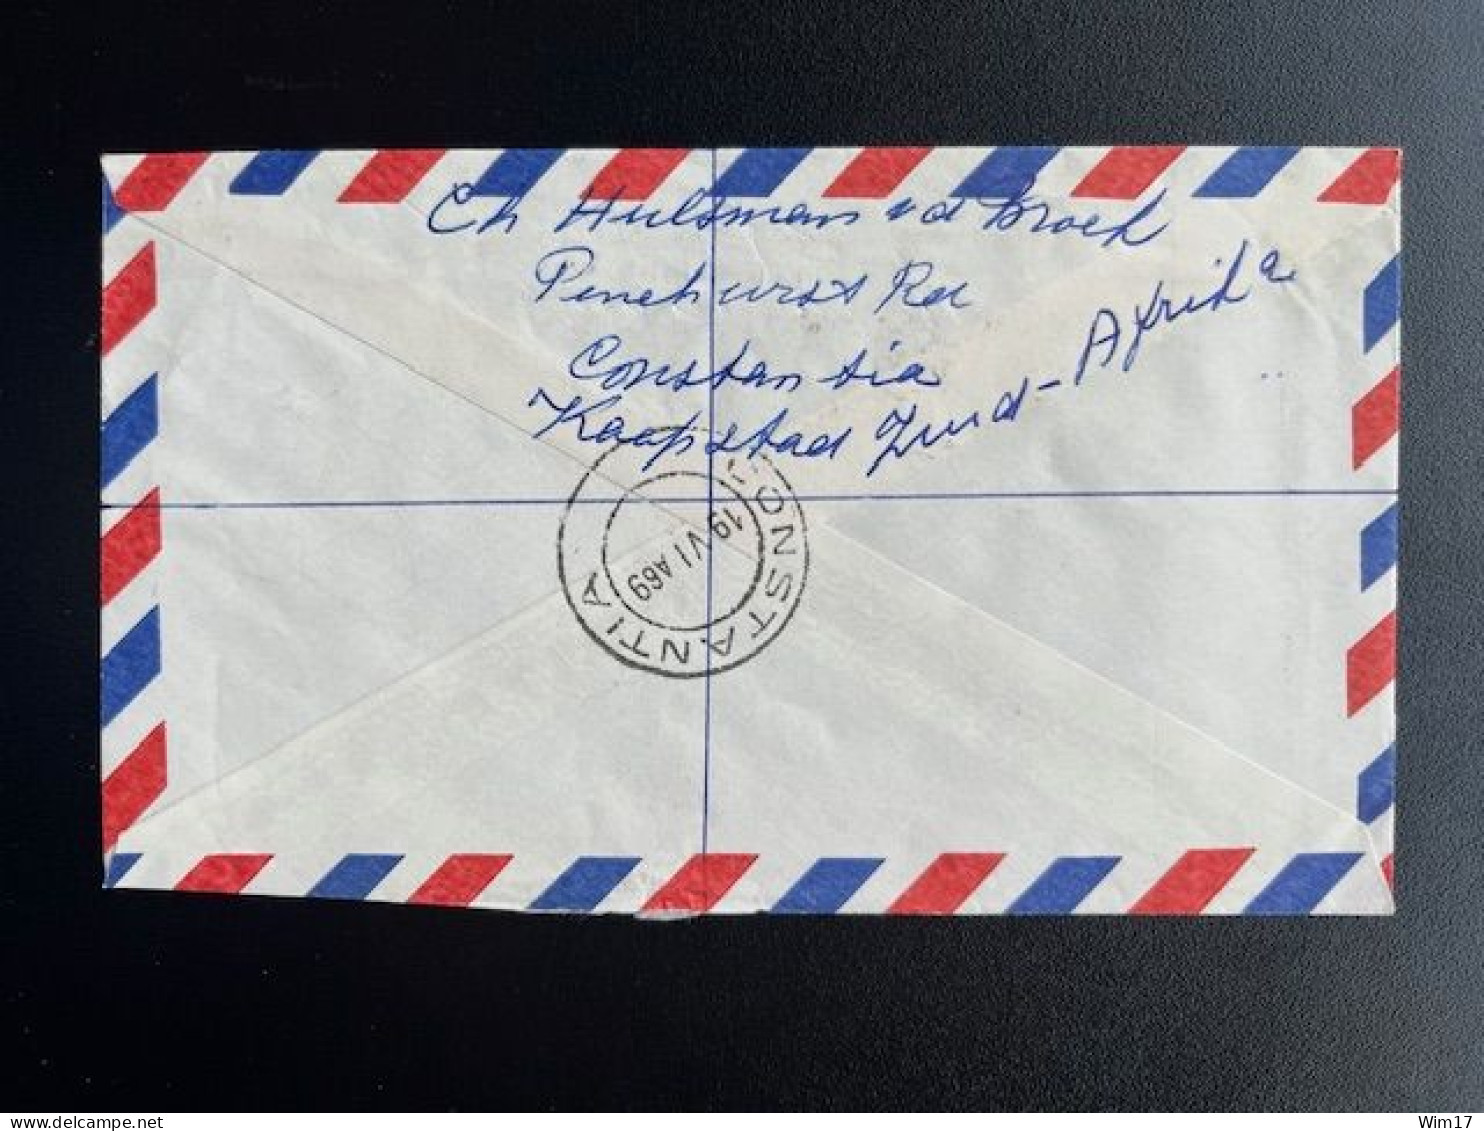 SOUTH AFRICA RSA 1969 REGISTERED LETTER CONSTANTIA TO THE HAGUE 19-06-1969 ZUID AFRIKA - Covers & Documents